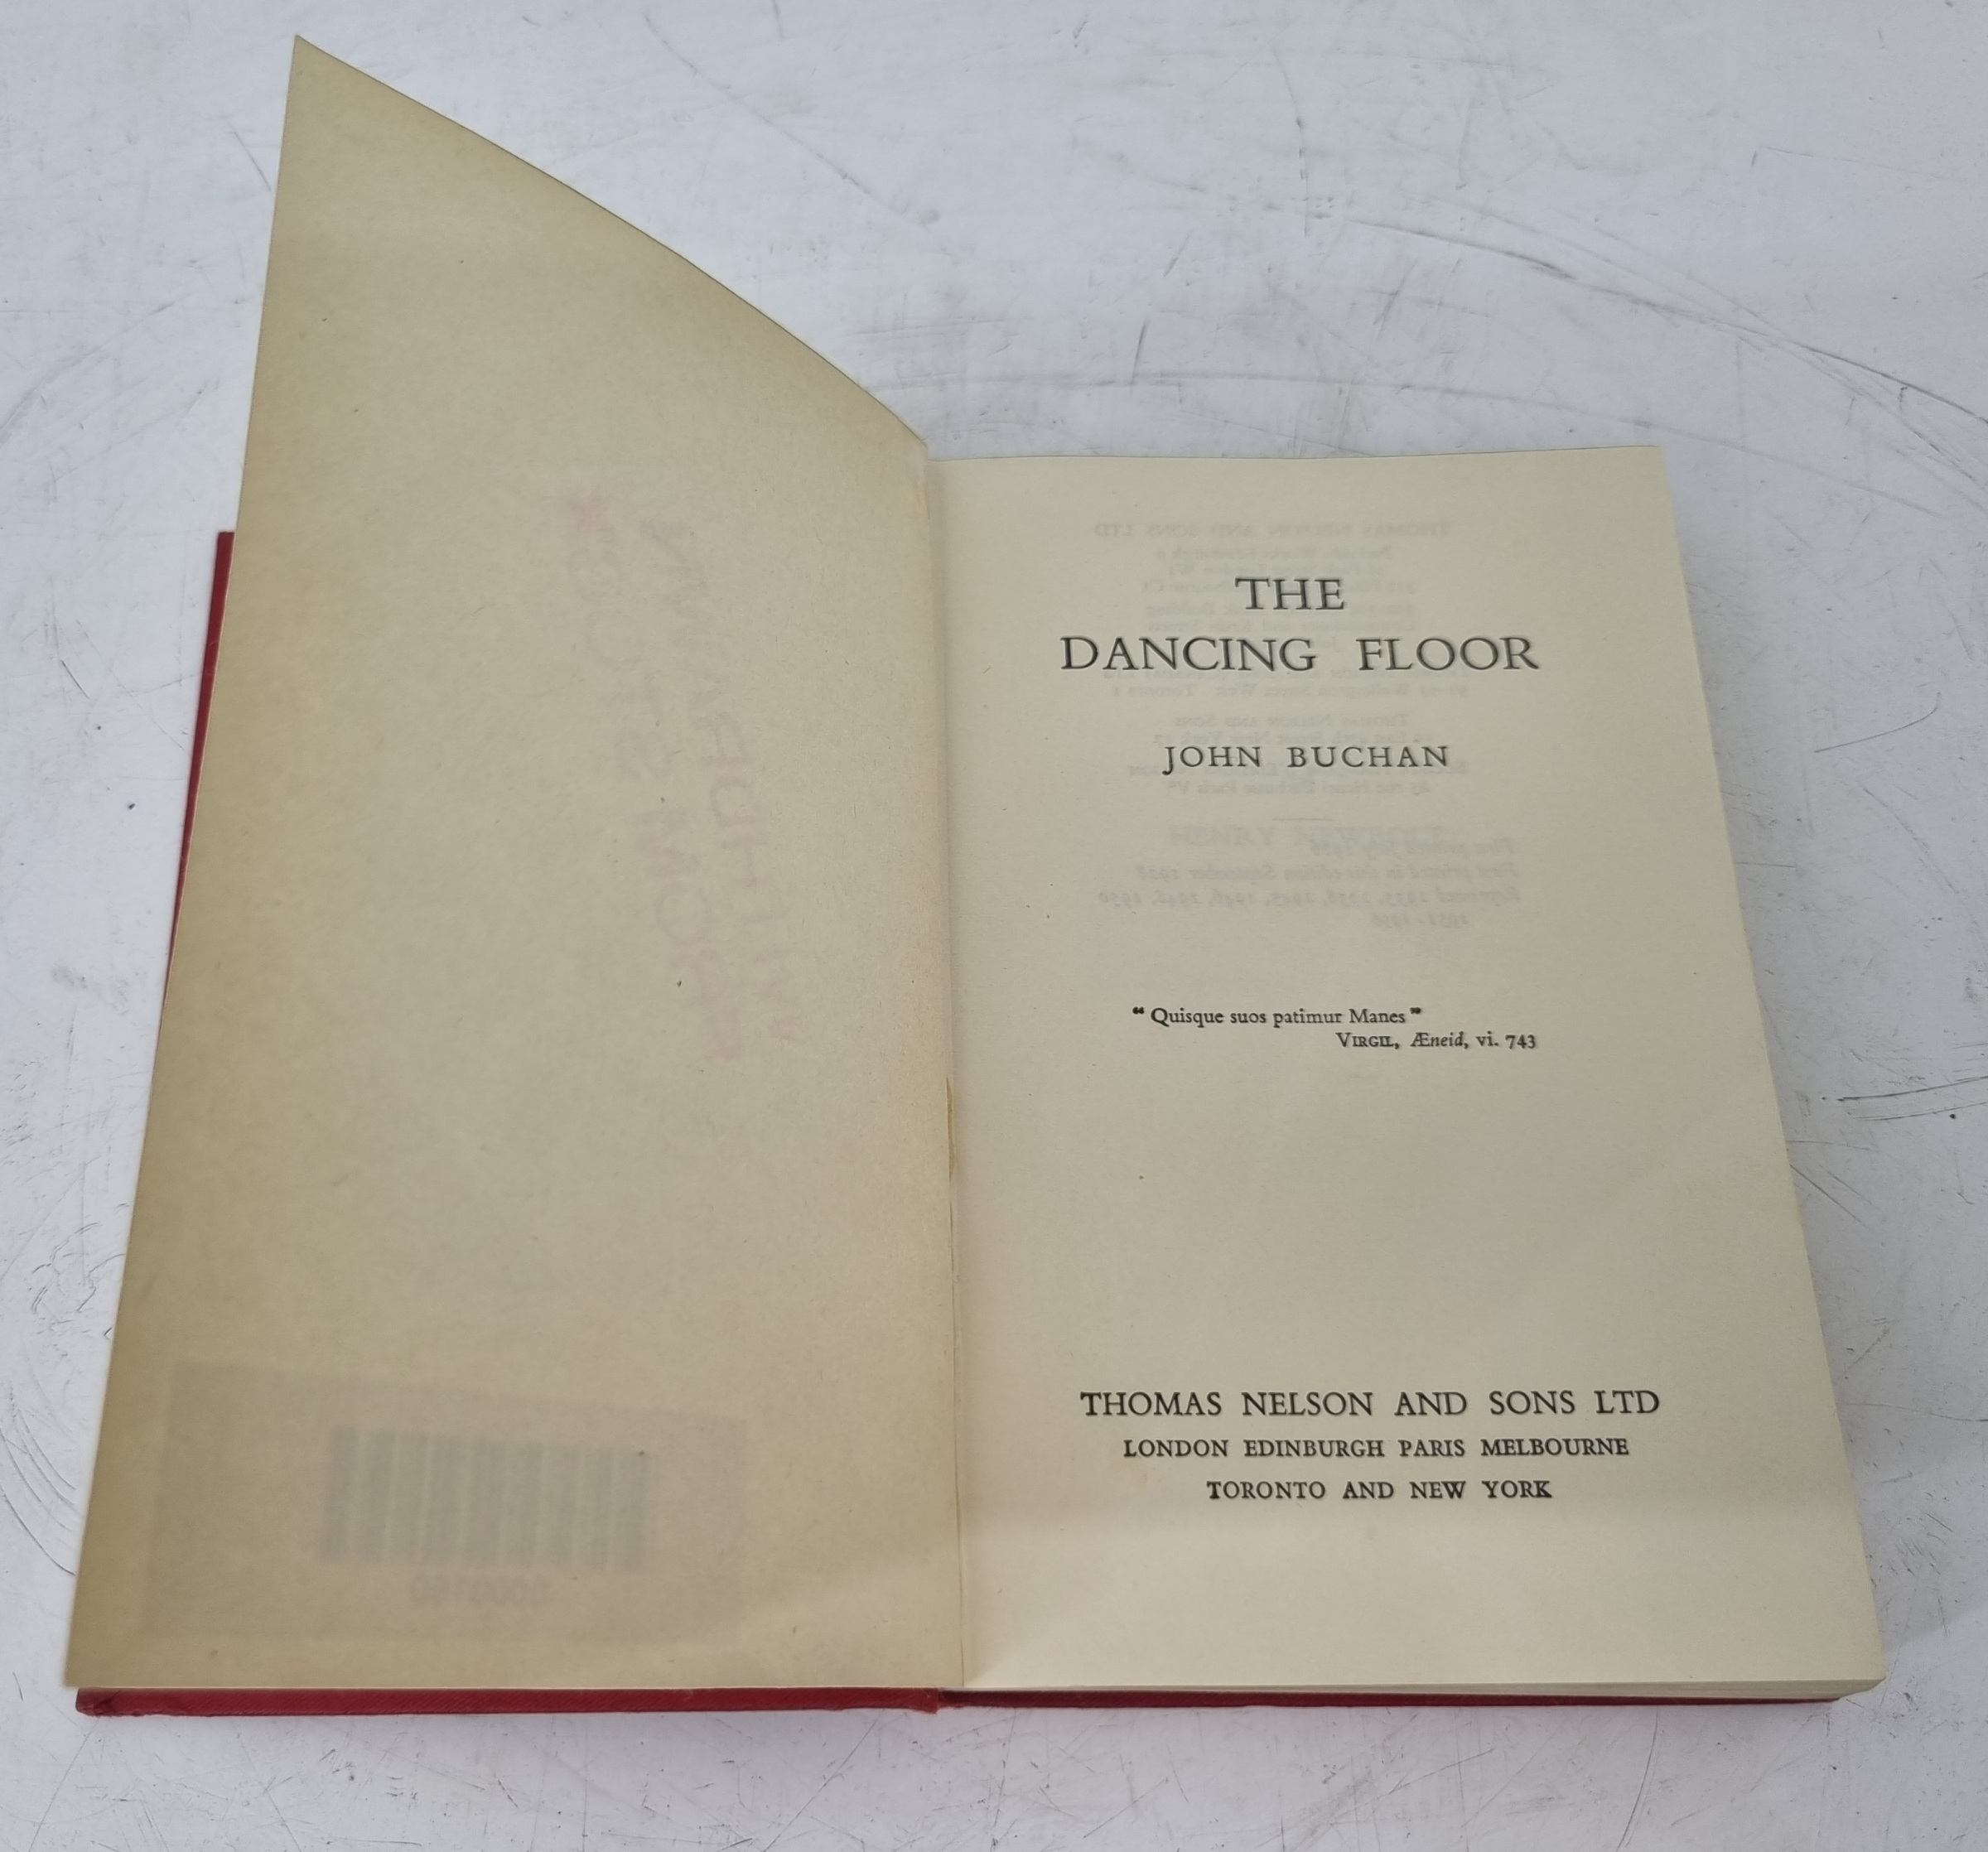 The Dancing Floor by John Buchan - Published Edinburgh 1956, Prester John by John Buchan - Published - Image 9 of 28